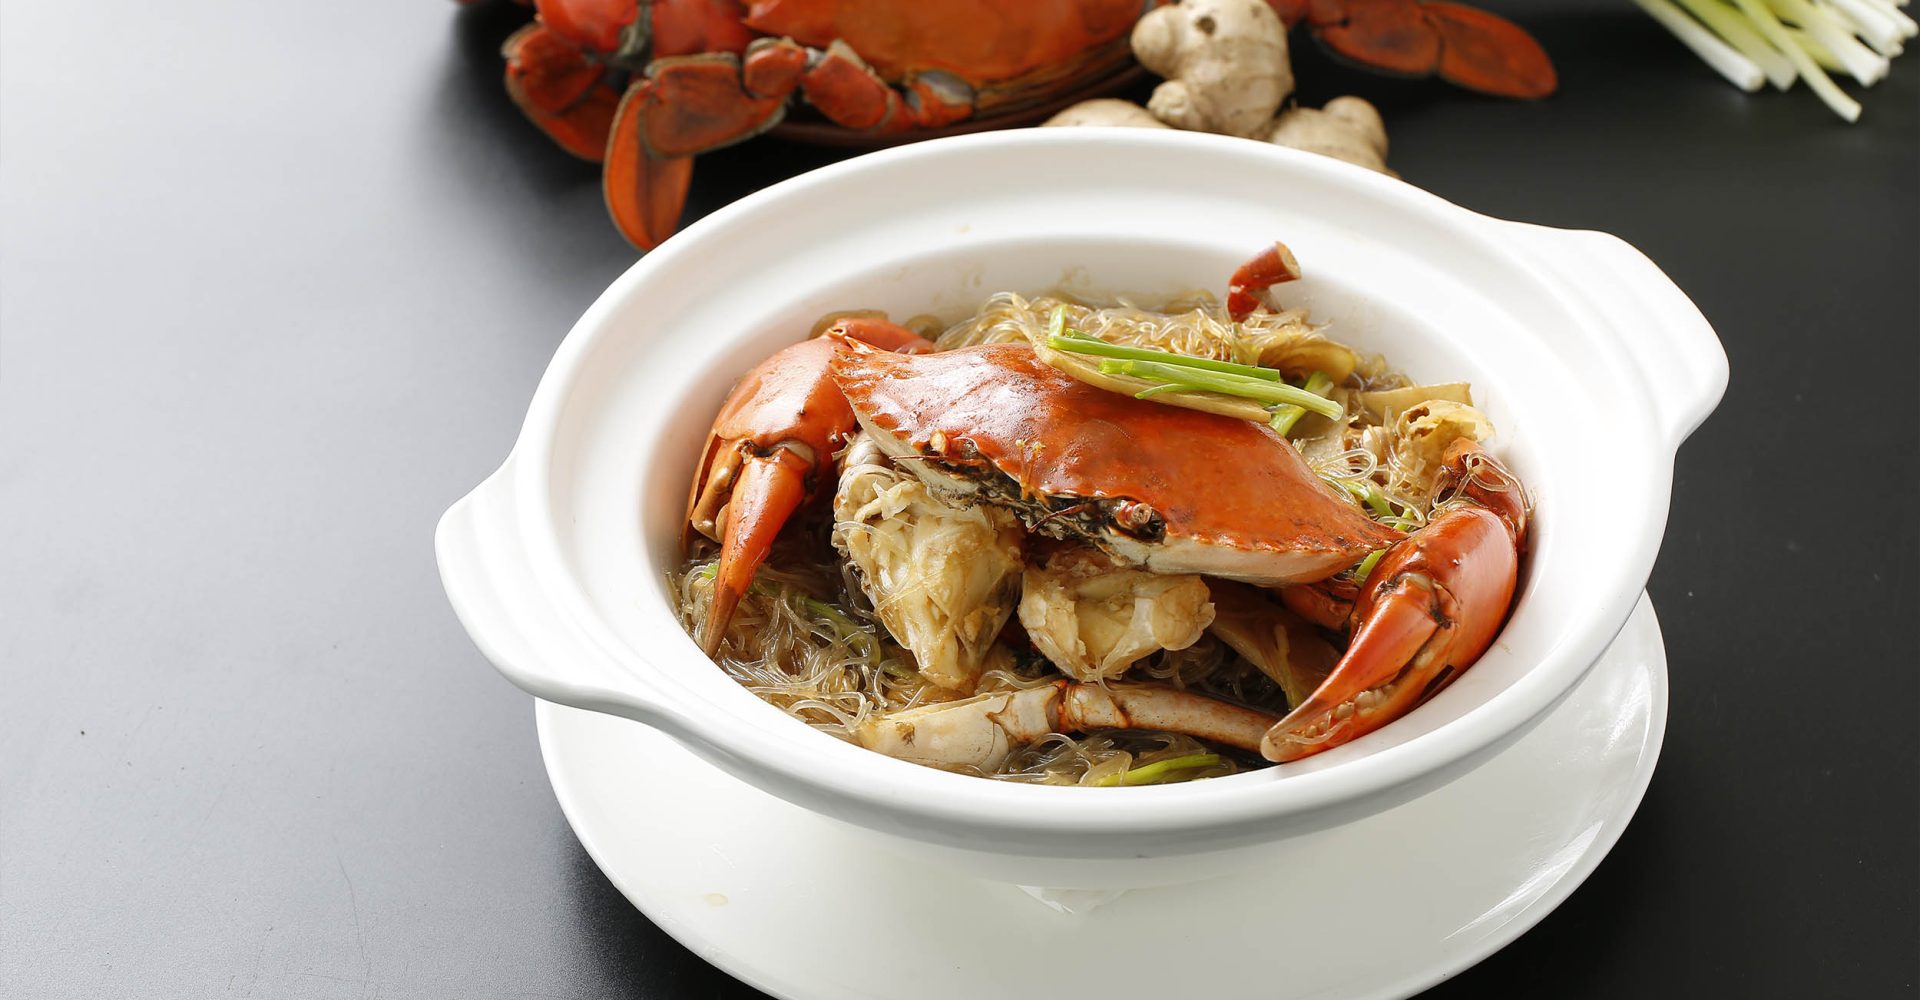 Xiu Live Seafood (crab) - Steamed crab with vermicelli in sate sauce